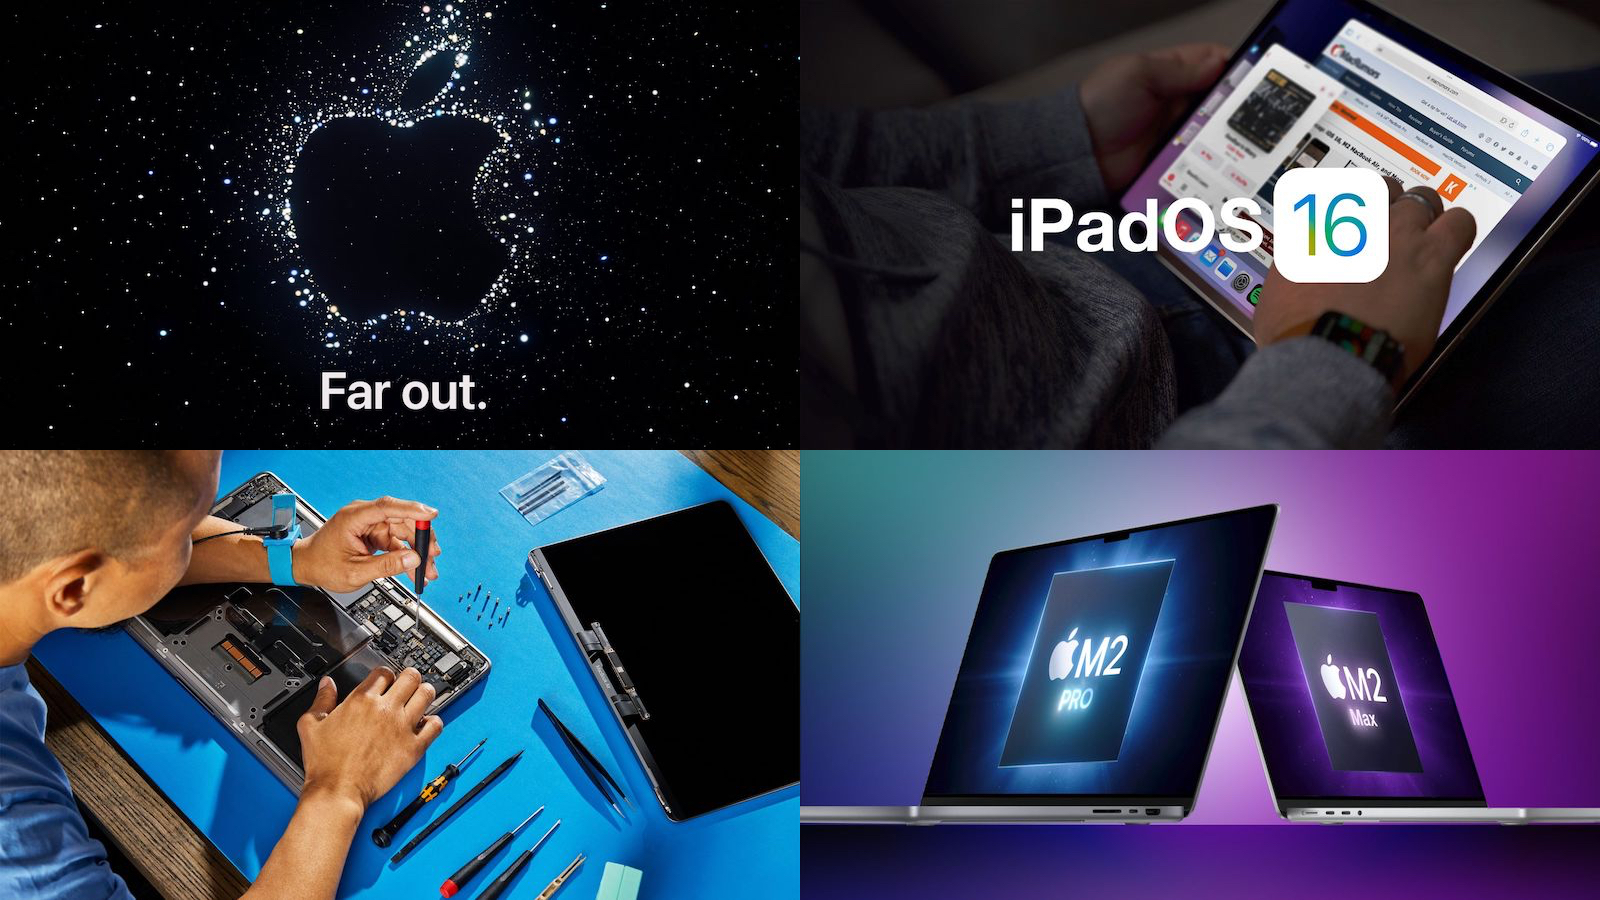 Top Stories: Apple Event Announced, iPadOS 16 Officially Delayed, and More